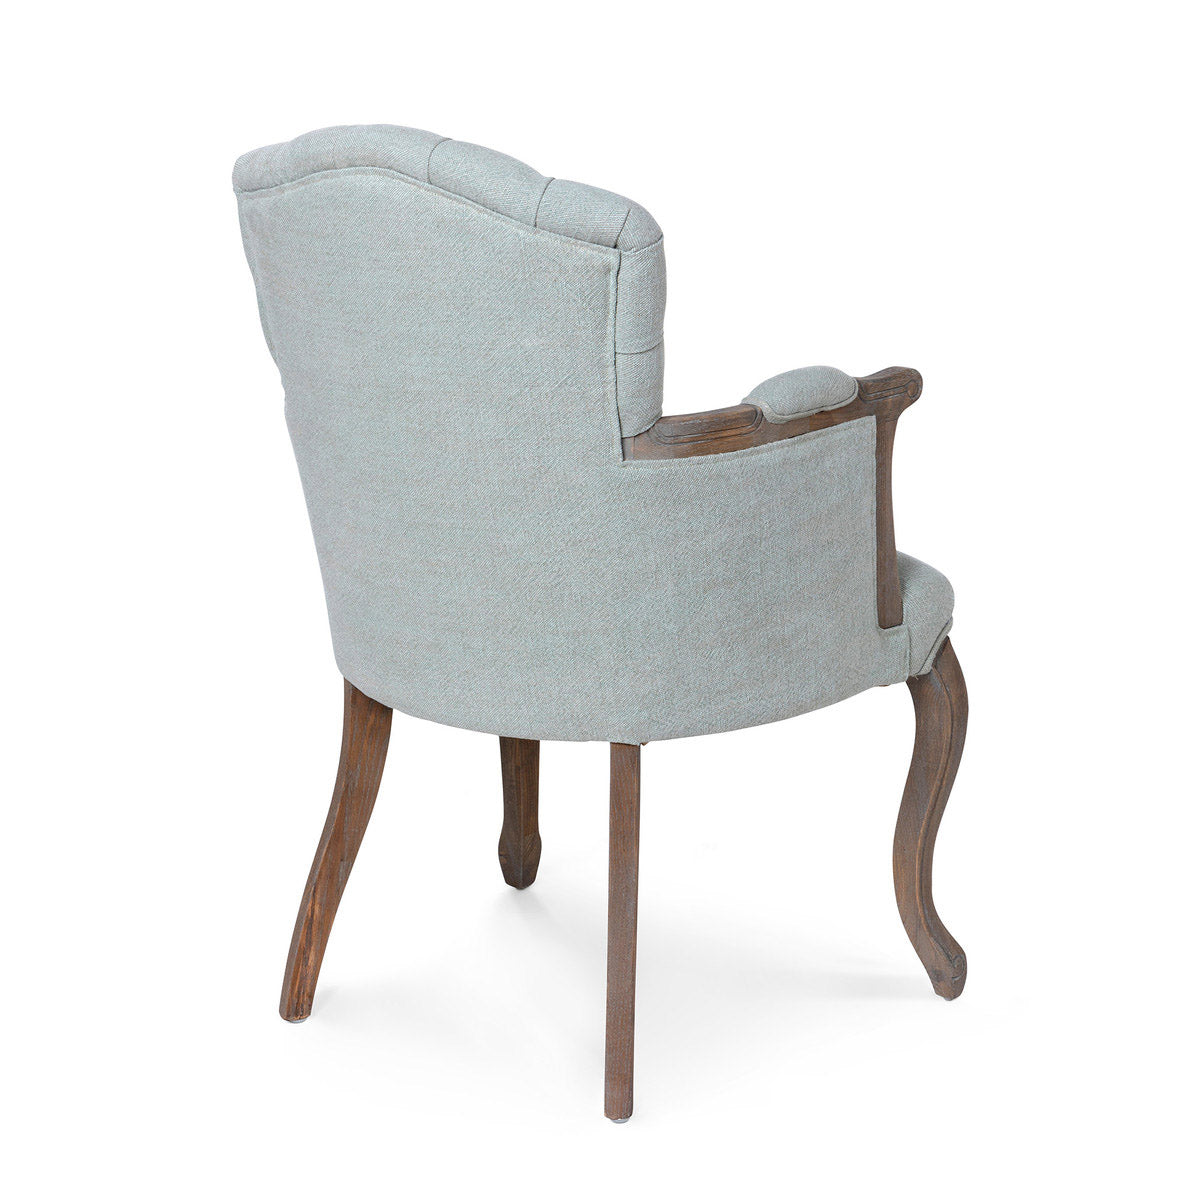 The Alyce Upholstered Vanity Chair